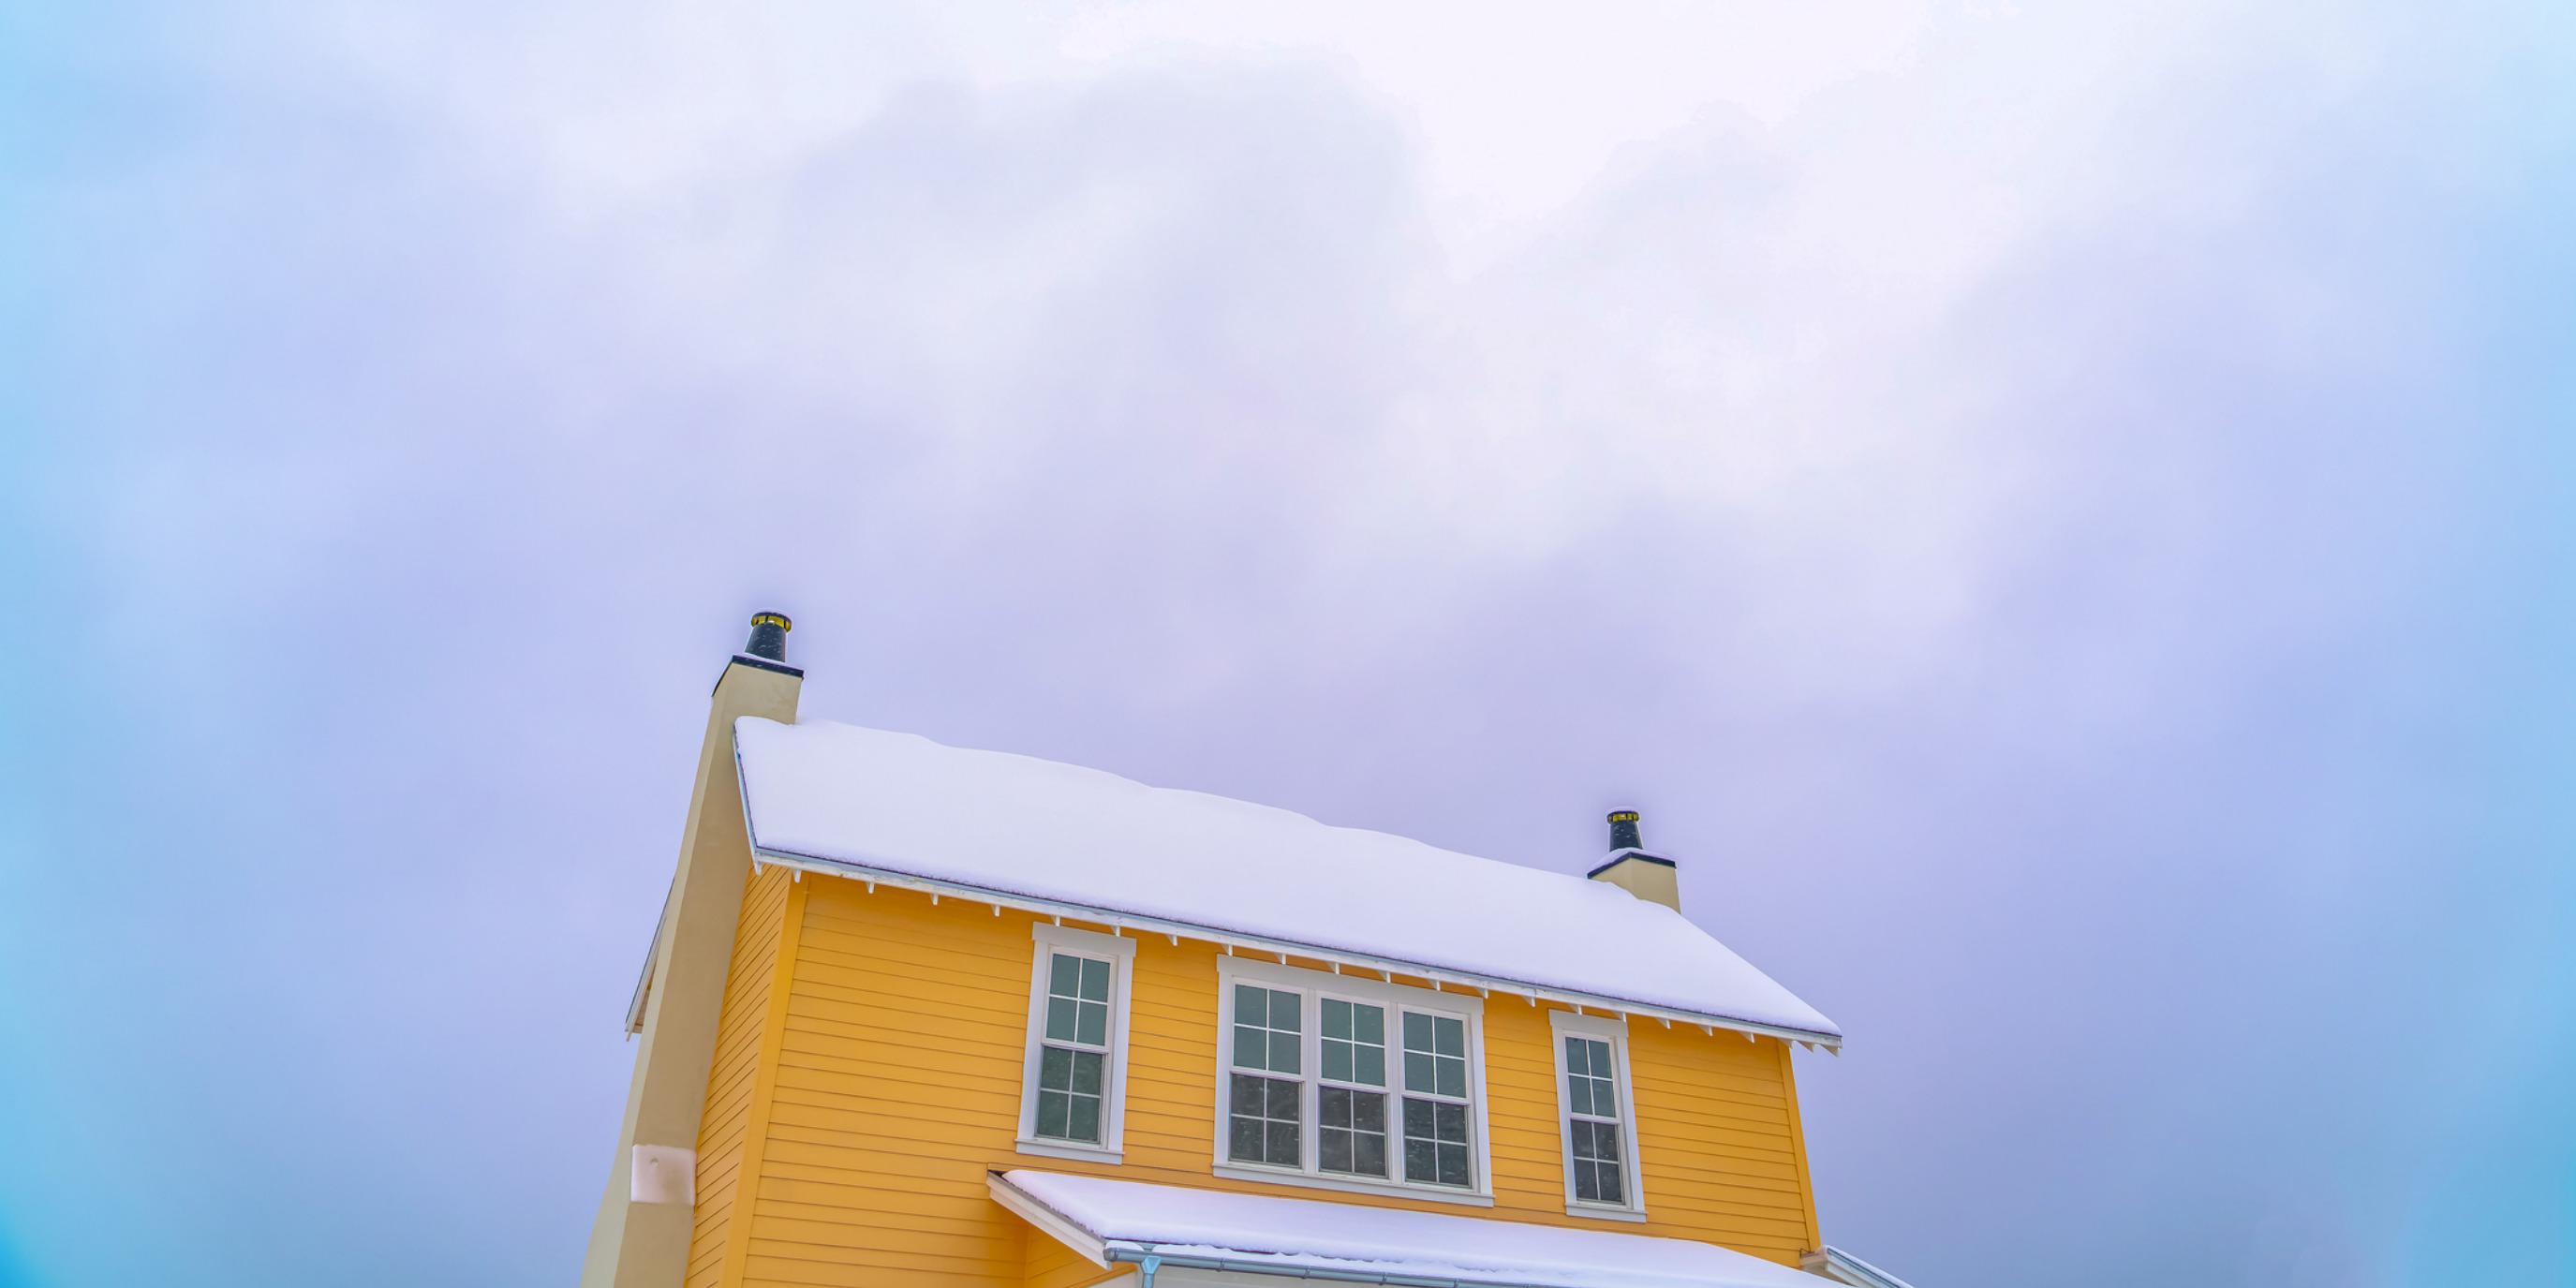 How to Protect Your Central Air Conditioning System in the Winter